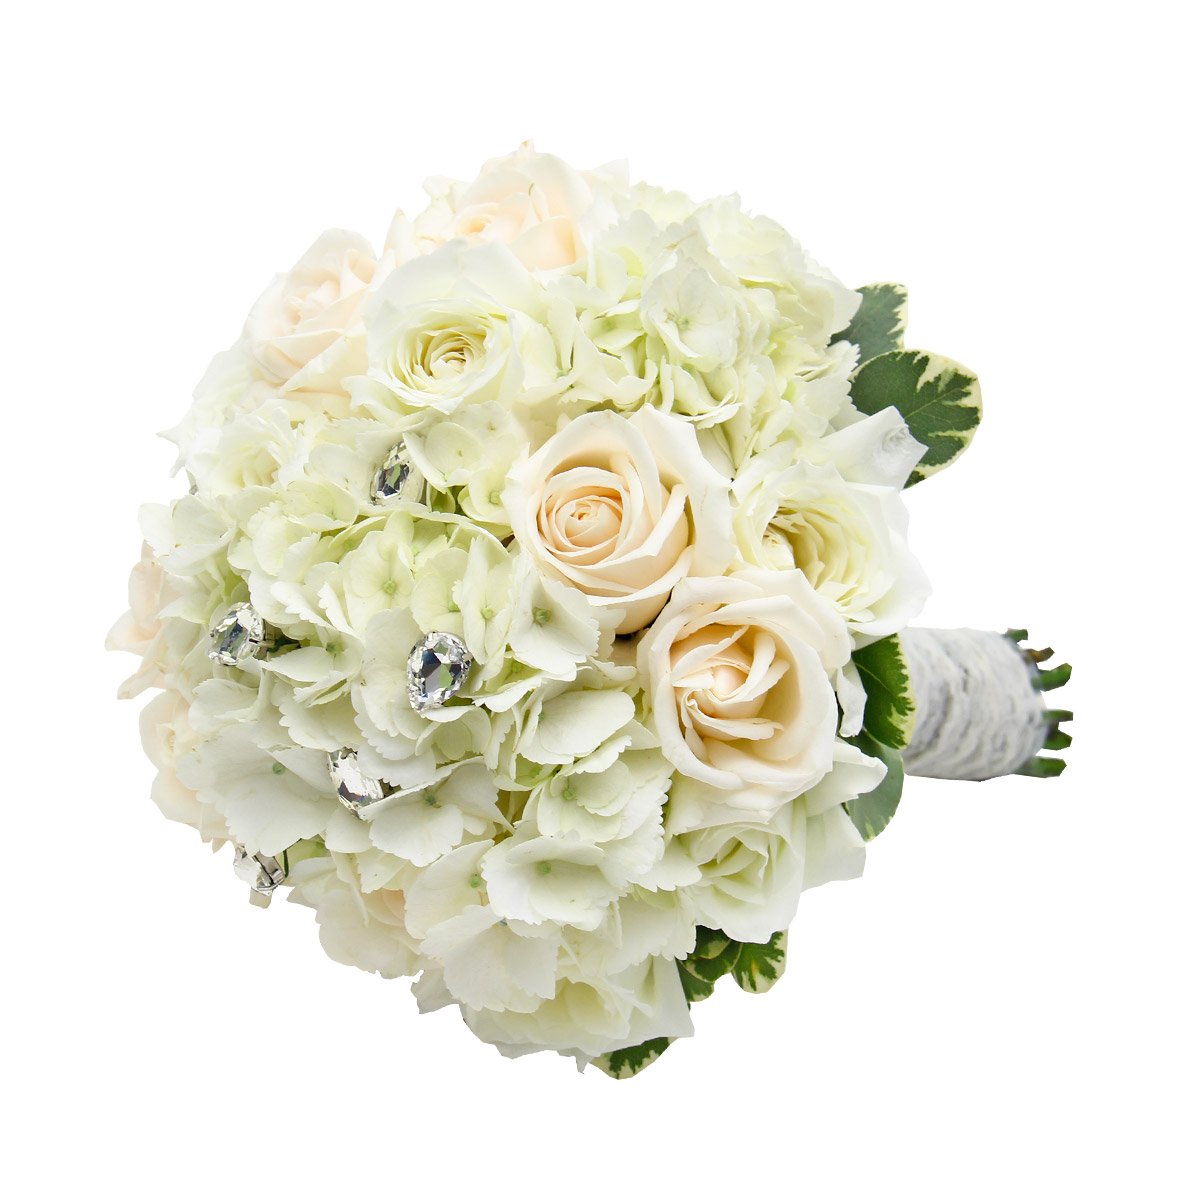 Loyal to Heart's Desire (Bridal Bouquet)